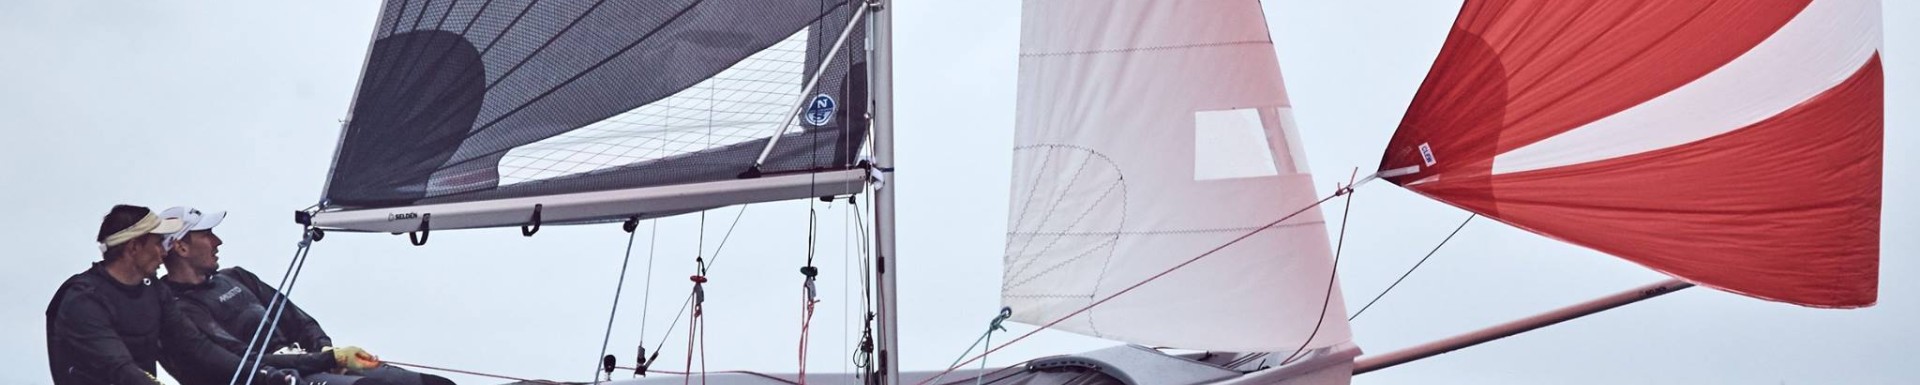 CREE YACHT Cup 2021